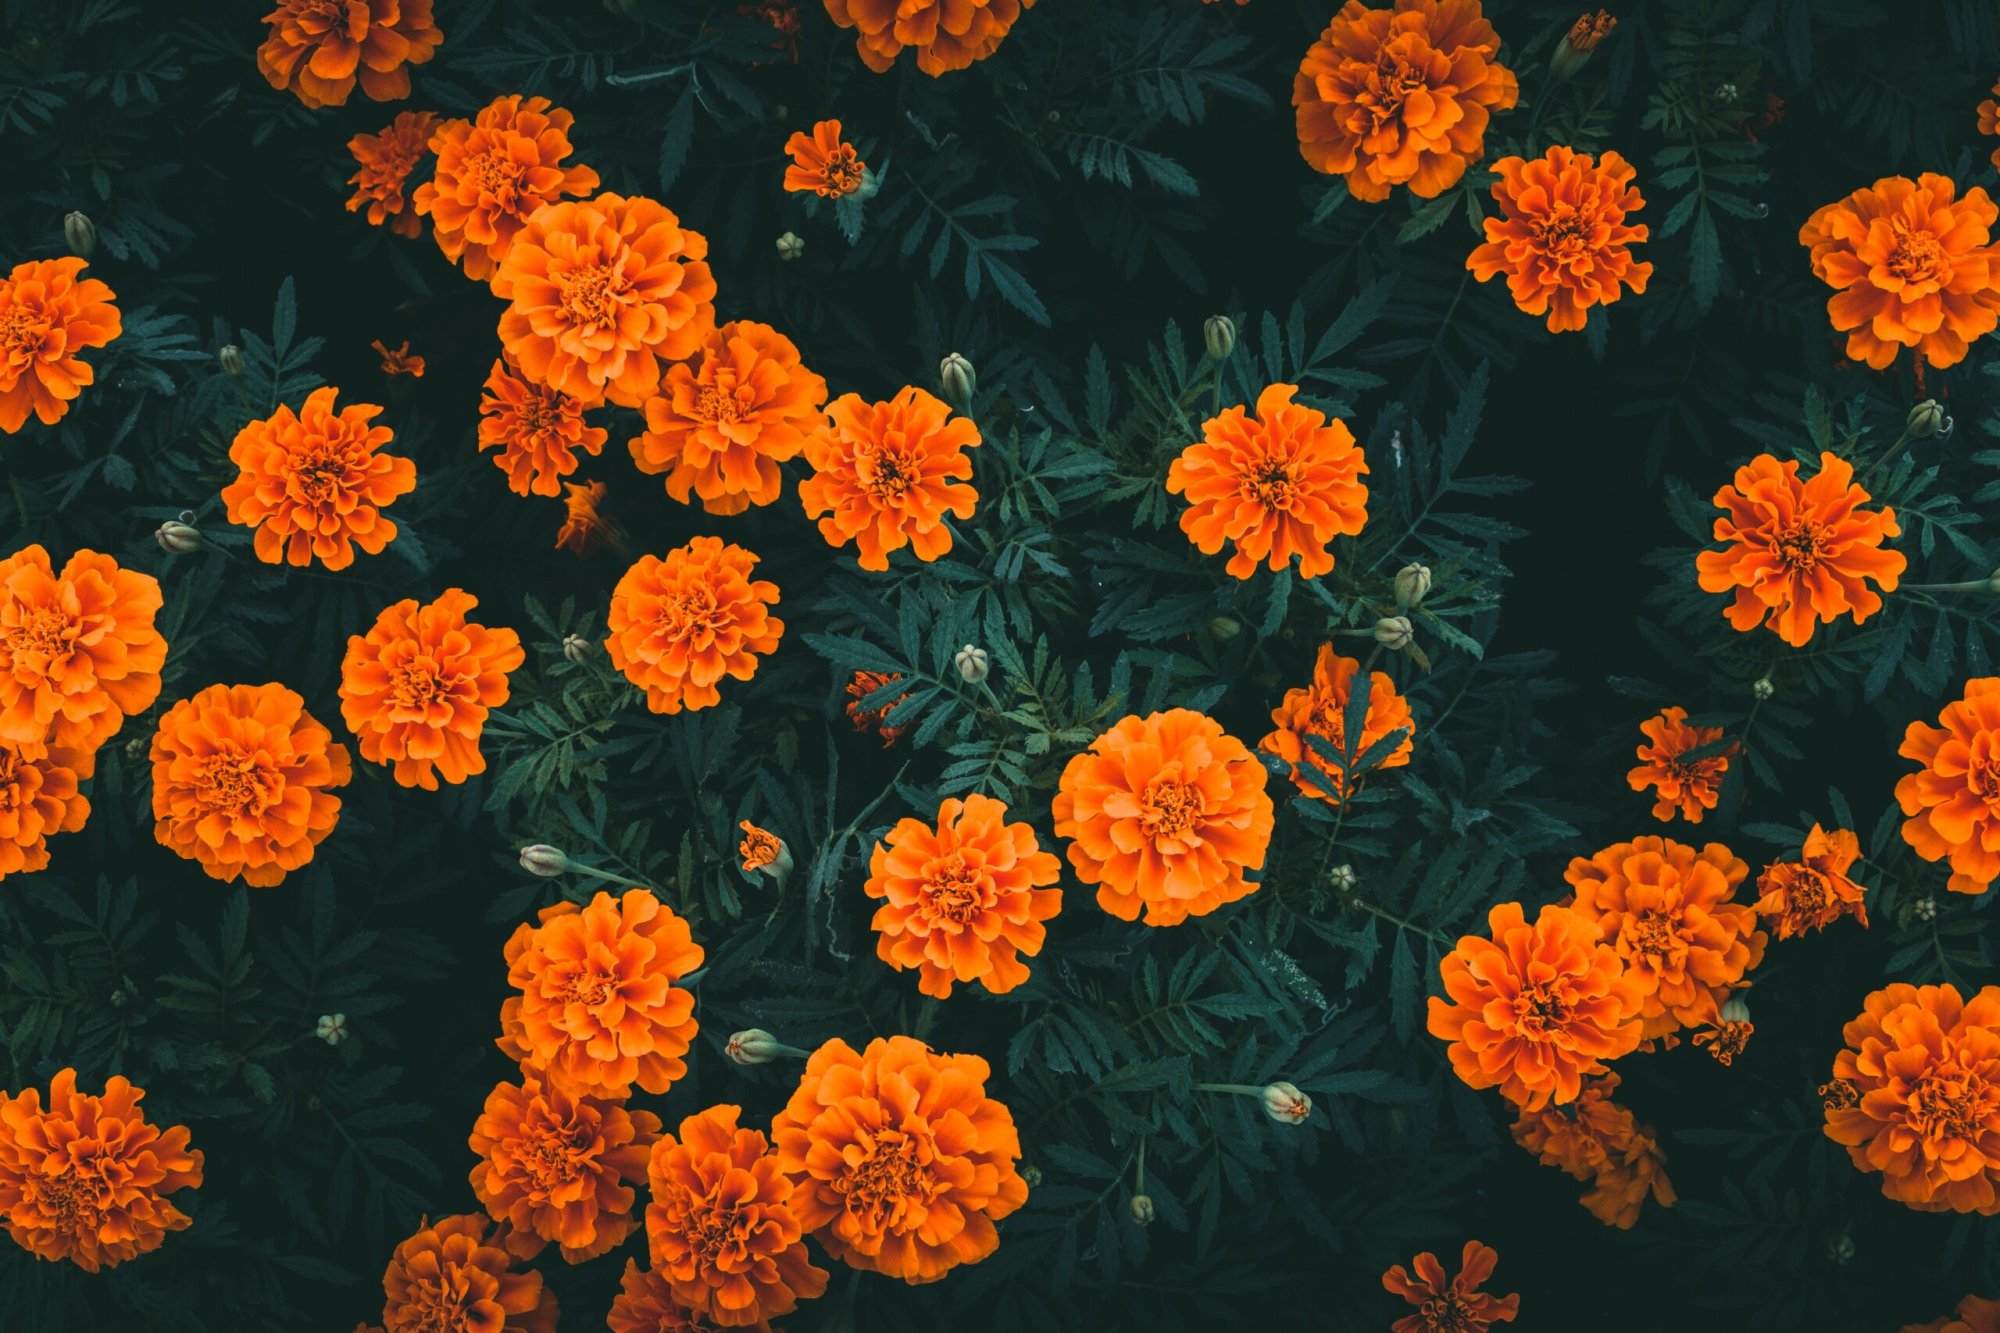 A close up of orange flowers on a dark background.